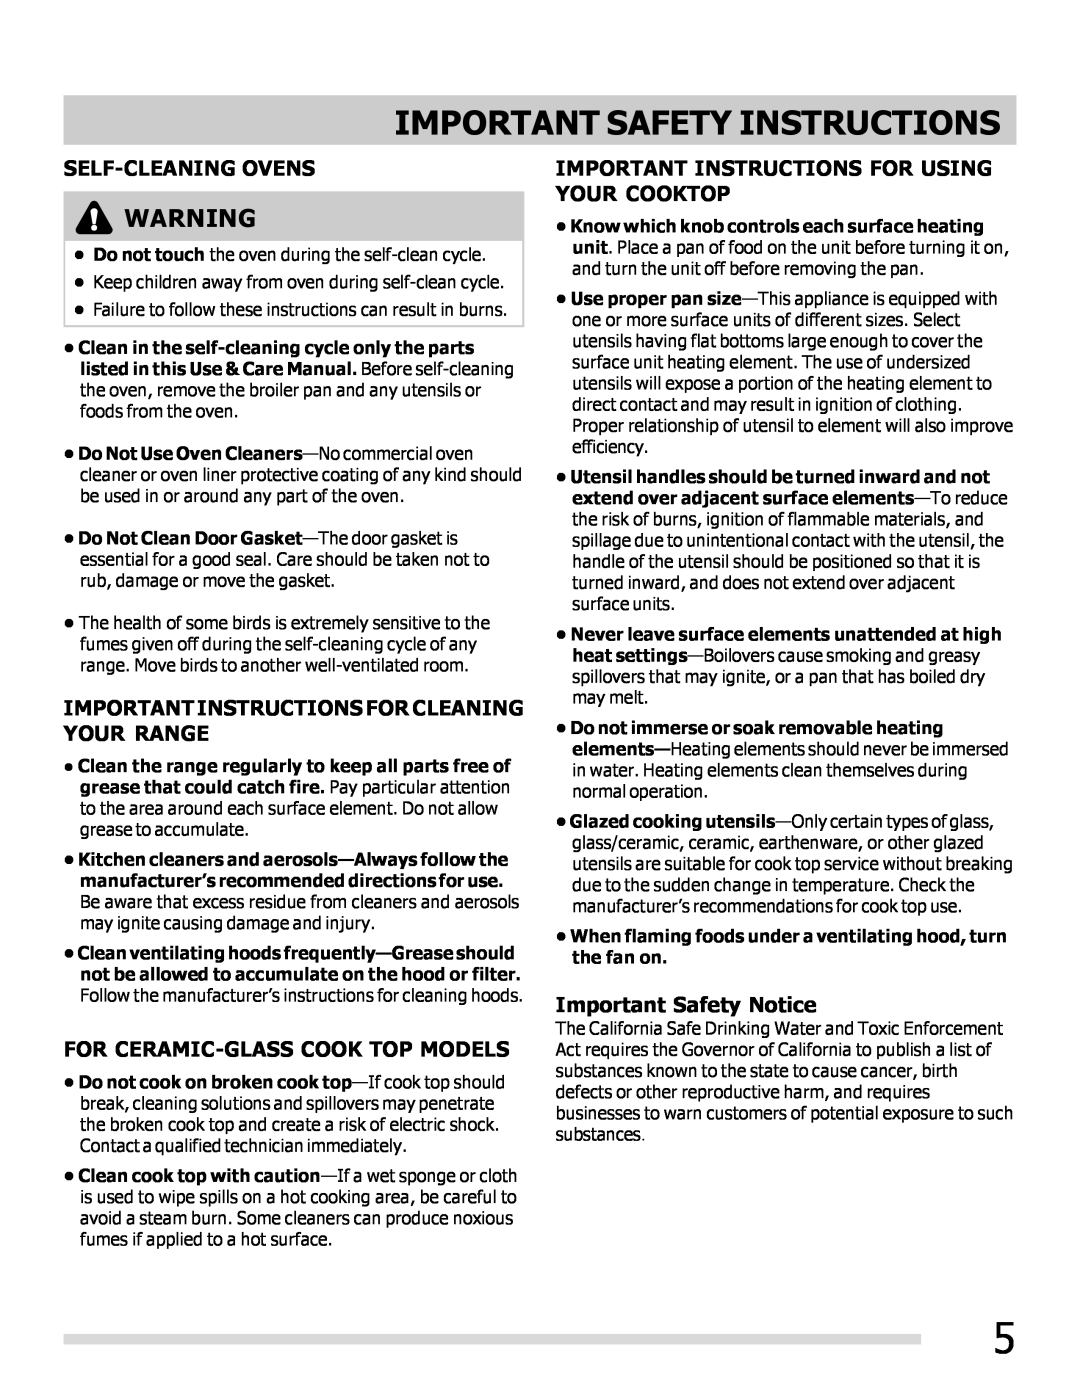 Frigidaire DGEF3041KF Self-Cleaning Ovens, Important Instructions For Cleaning Your Range, Important Safety Notice 